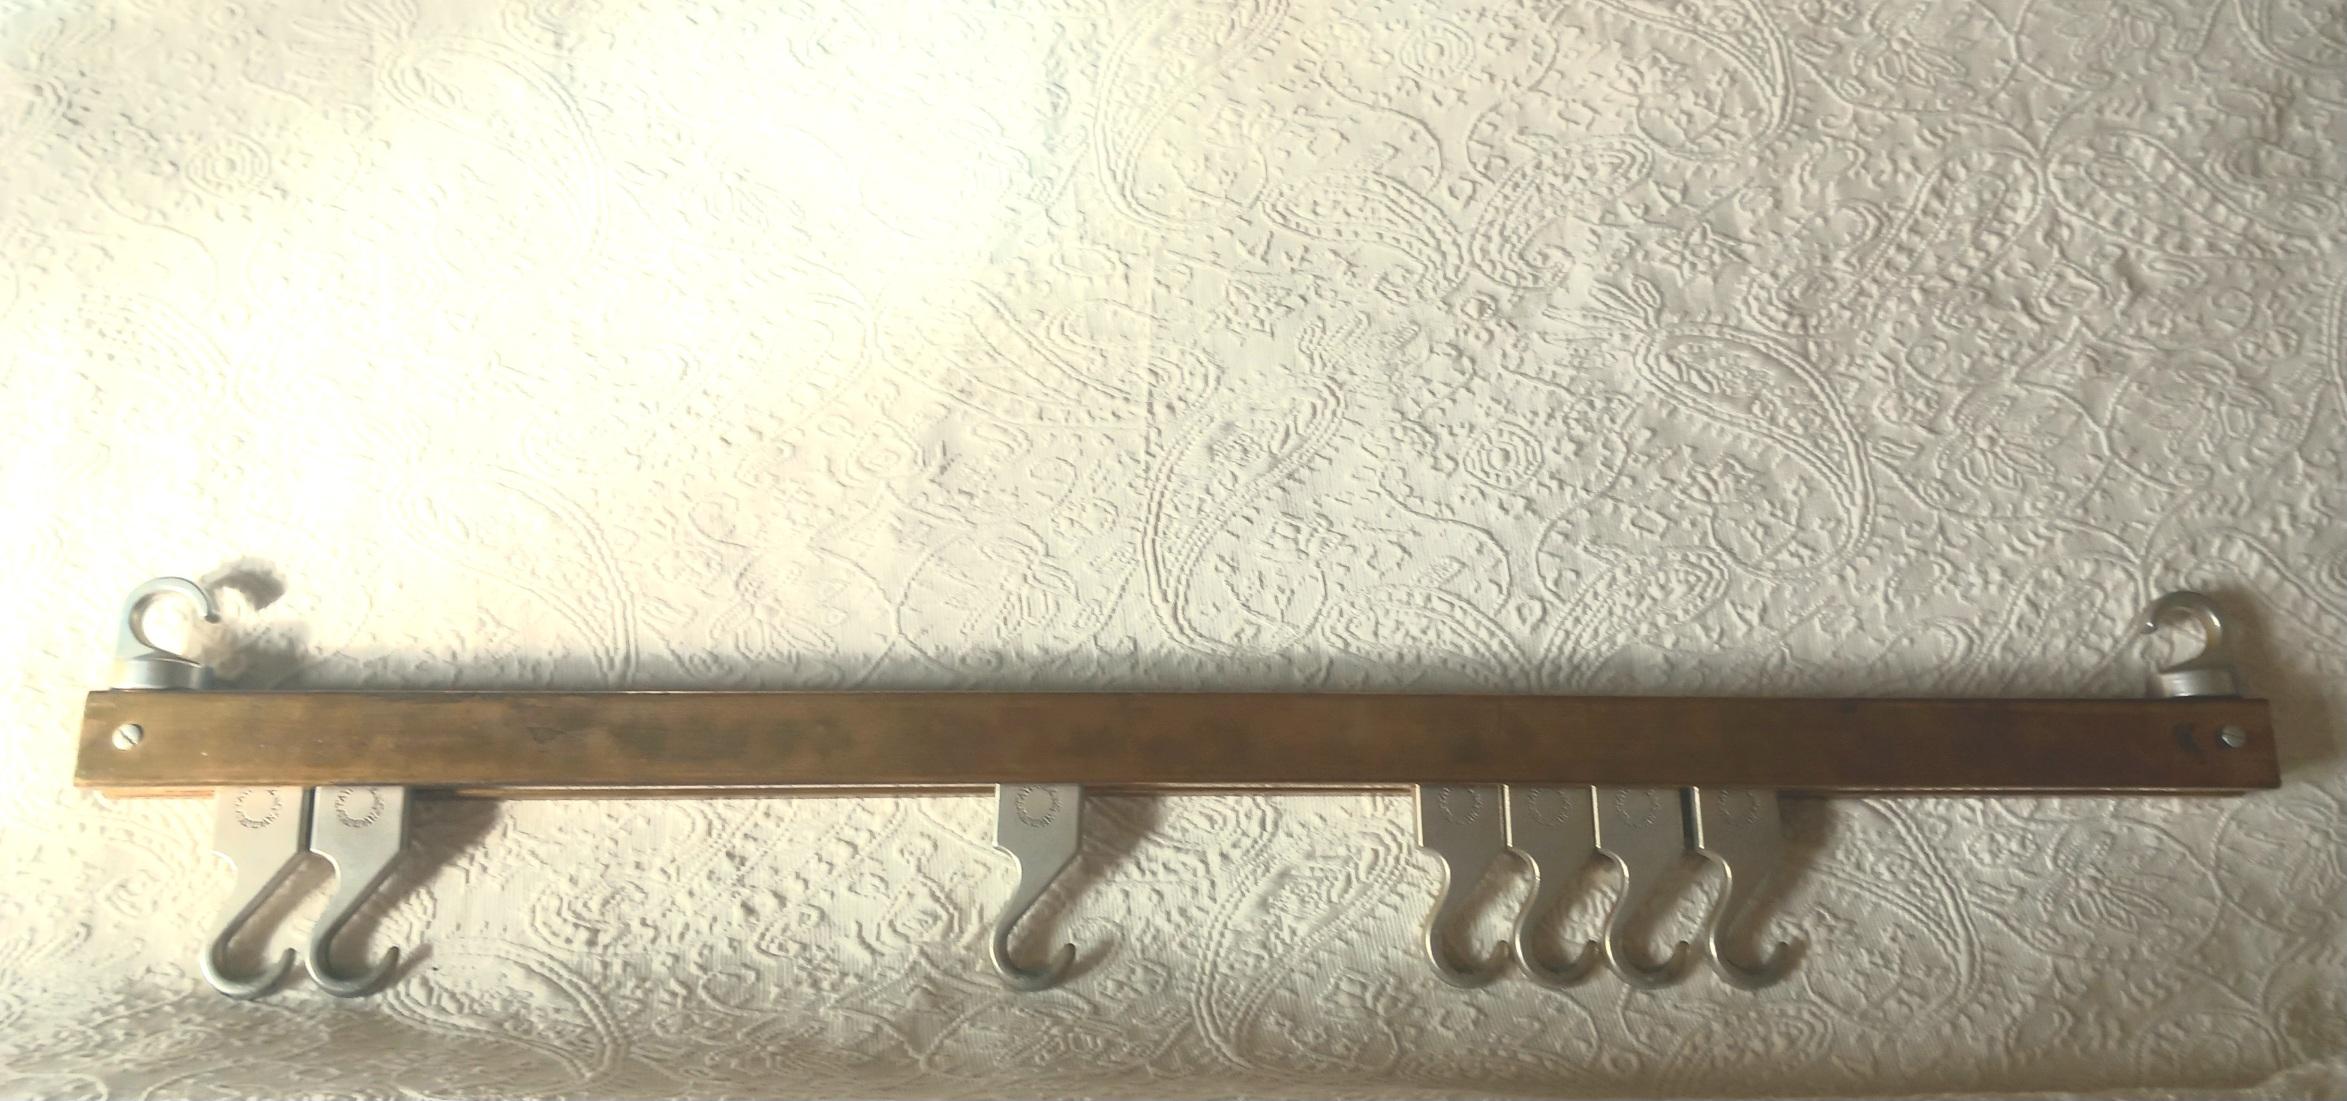 Butcher Hanger  Brass and Steel Whit 7 Movable Hooks.Industrial  Large Size 92cm 1